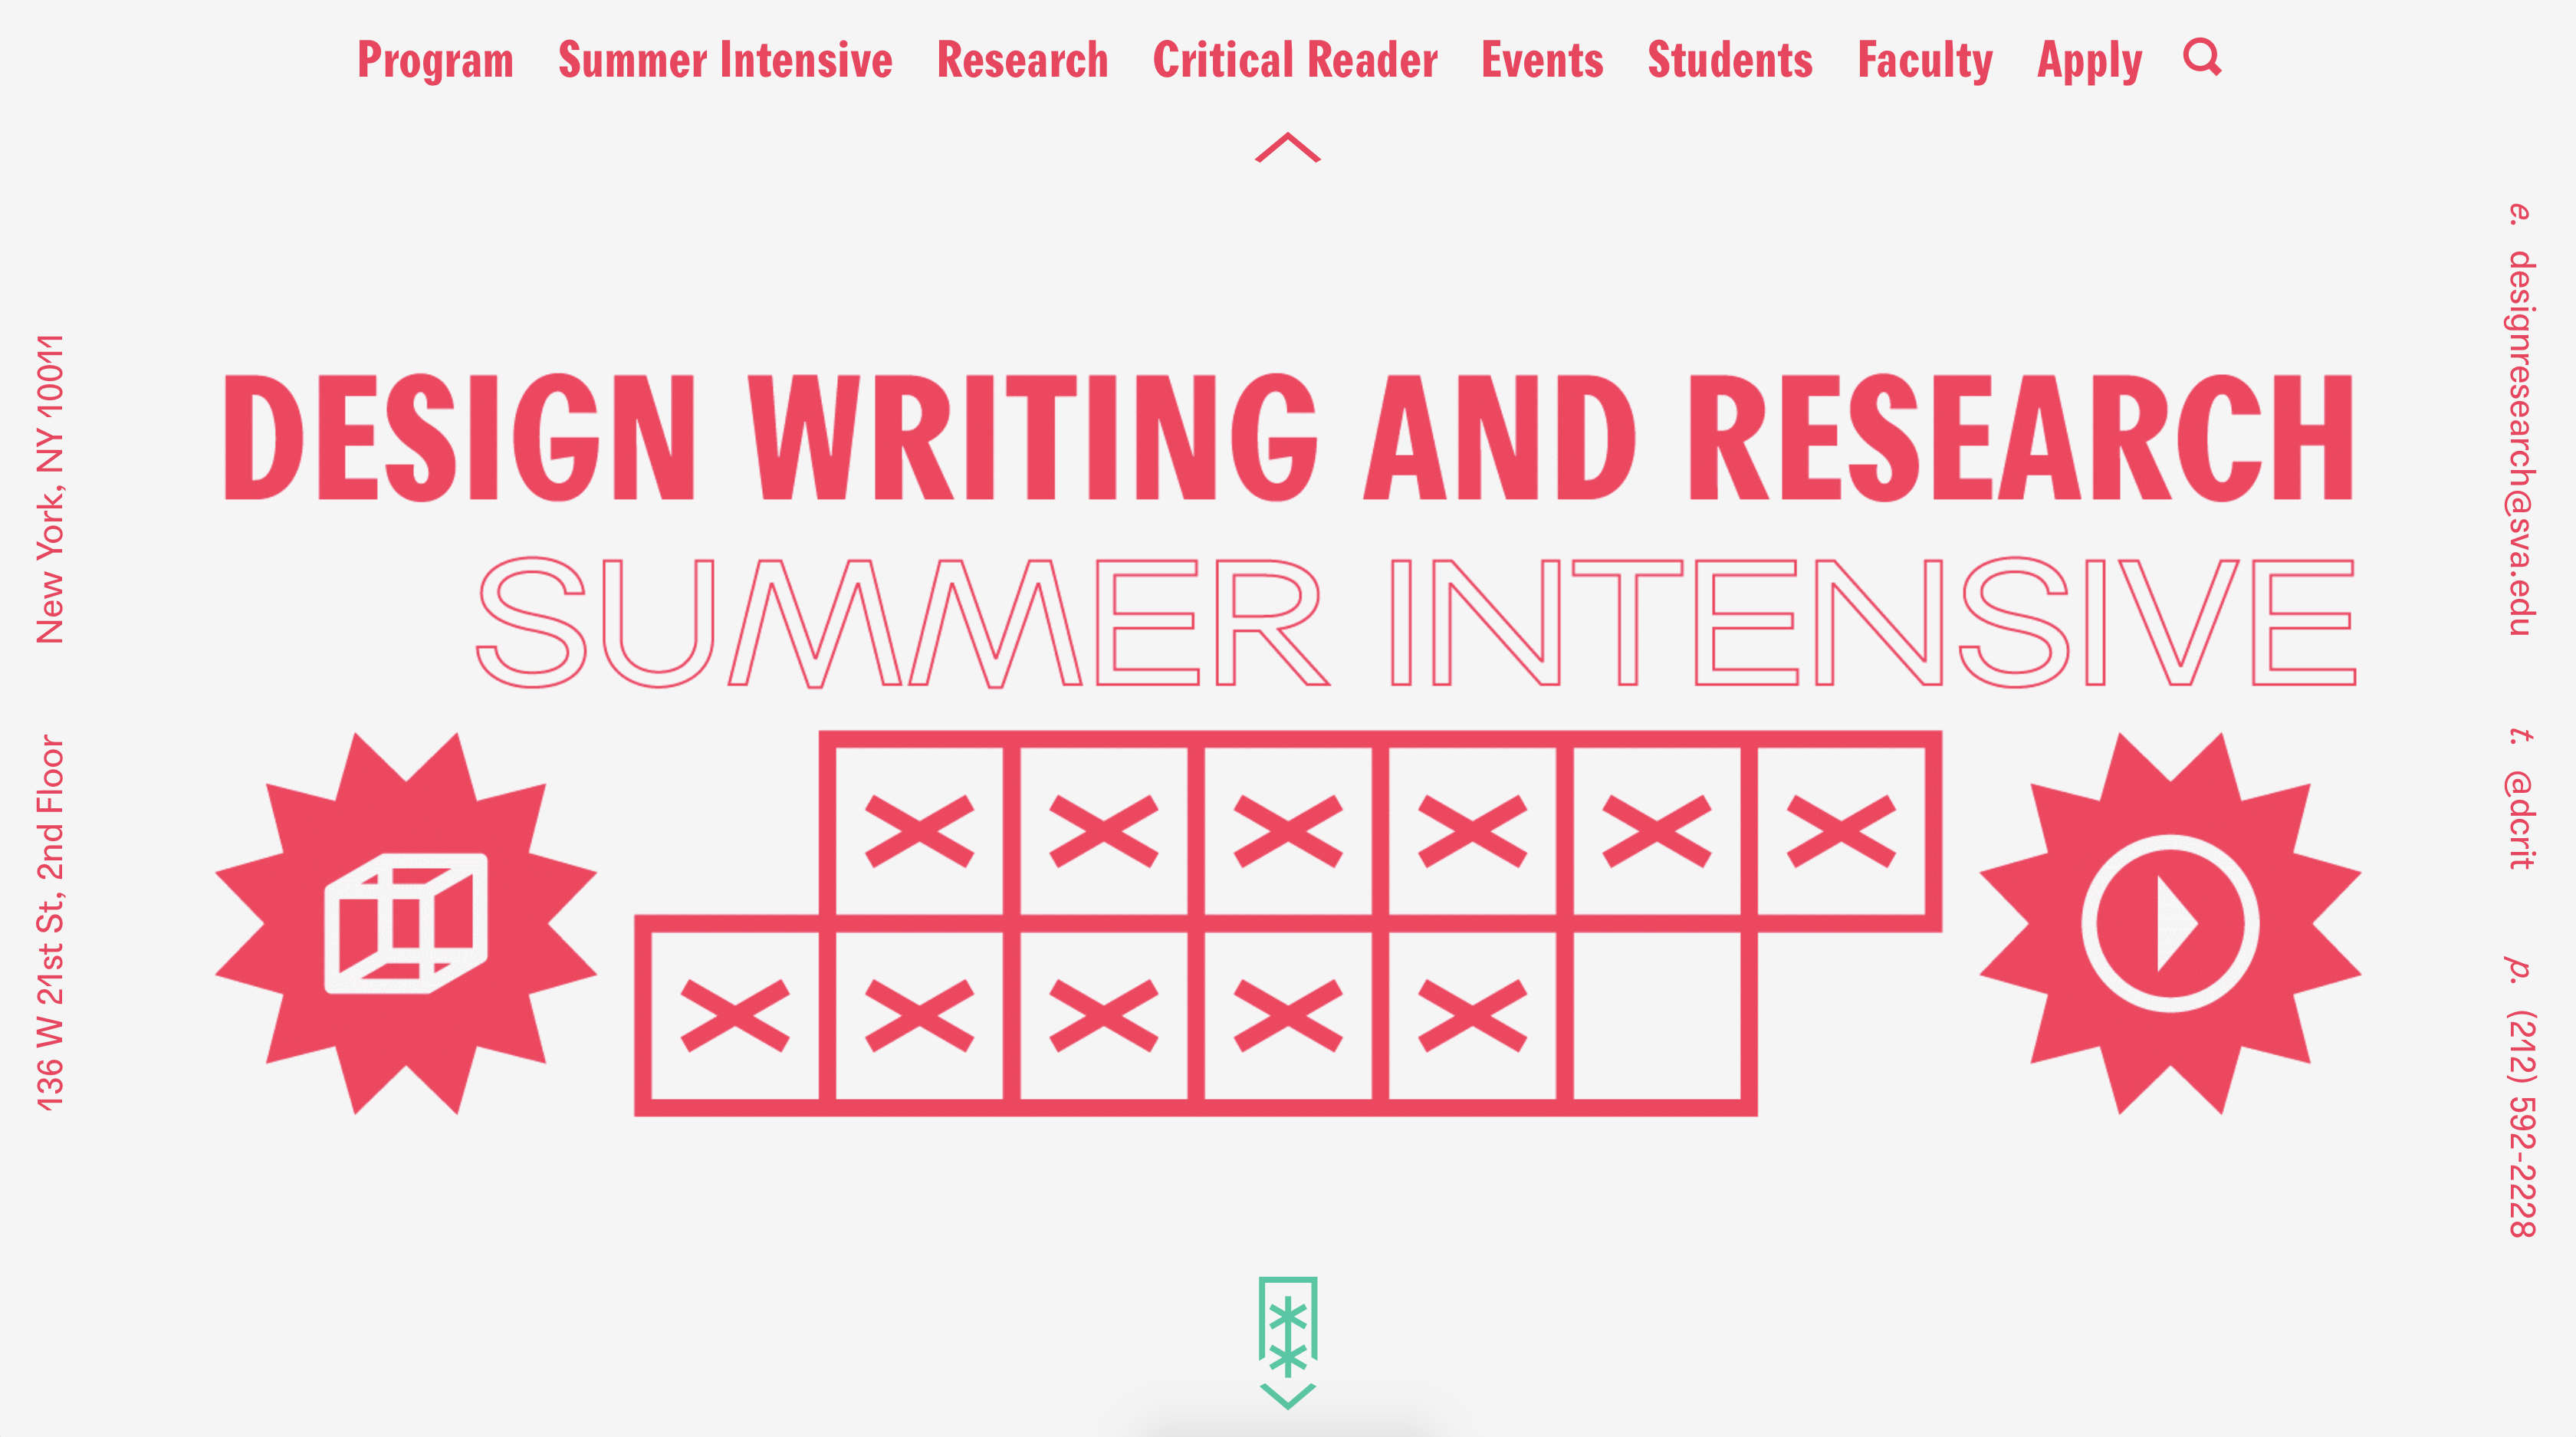 Design Writing and Research Summer Intensive